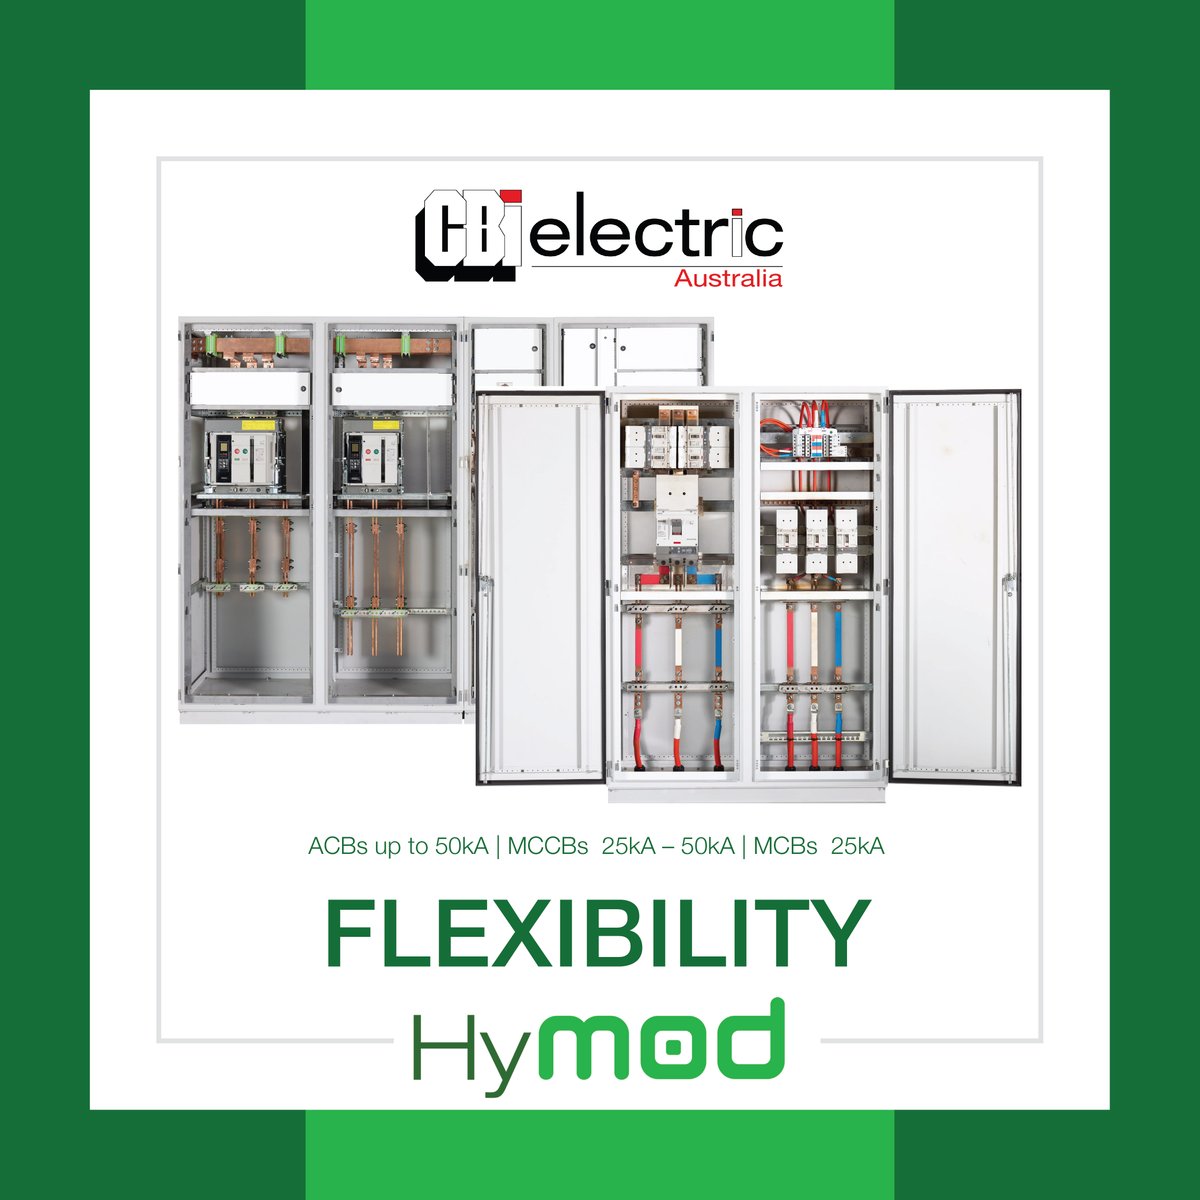 𝗛𝘆𝗠𝗼𝗱® modular distribution systems are designed & made in 𝗠𝗲𝗹𝗯𝗼𝘂𝗿𝗻𝗲, and ensure #flexibility & reliability for various applications.  

#ElectricalProtection #electrical #innovation #technology #electrician #electricalcontractor #supportlocal #buylocal